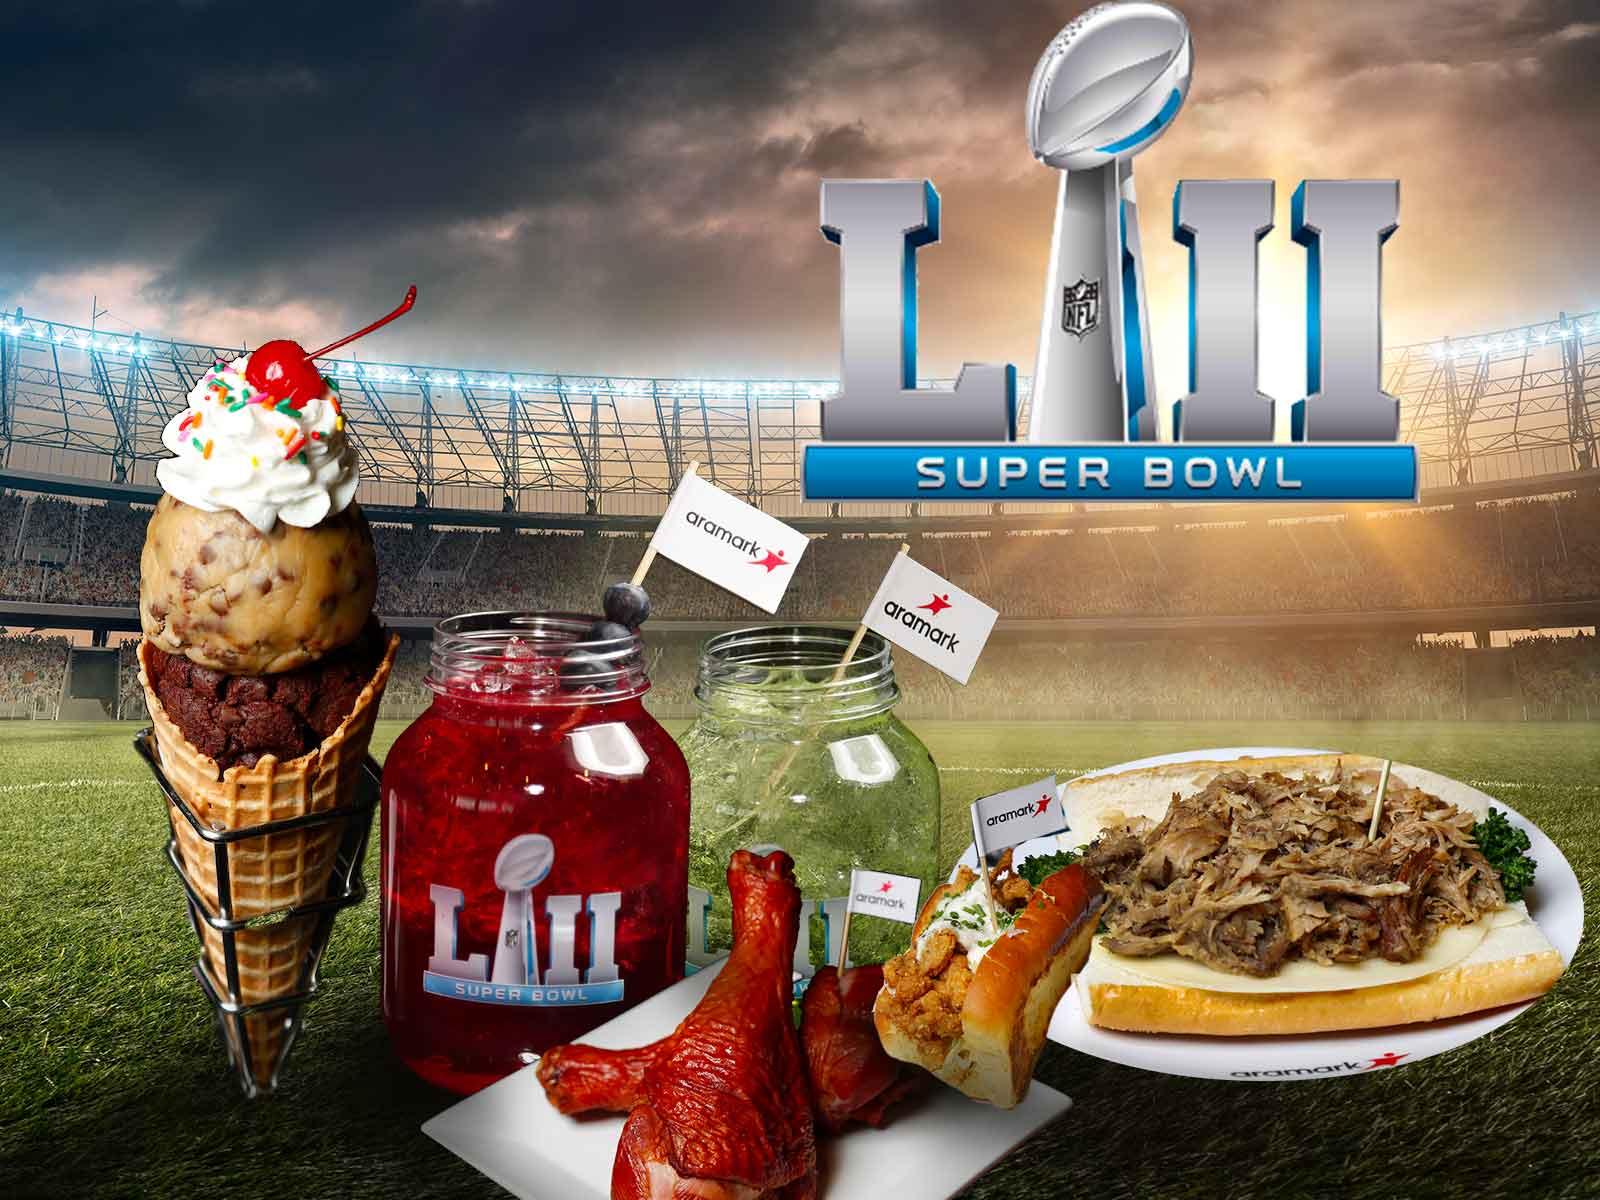 Super Bowl LII Servin’ Up 32,000 Hot Dogs & 2,600 Lbs of Cheese Curds